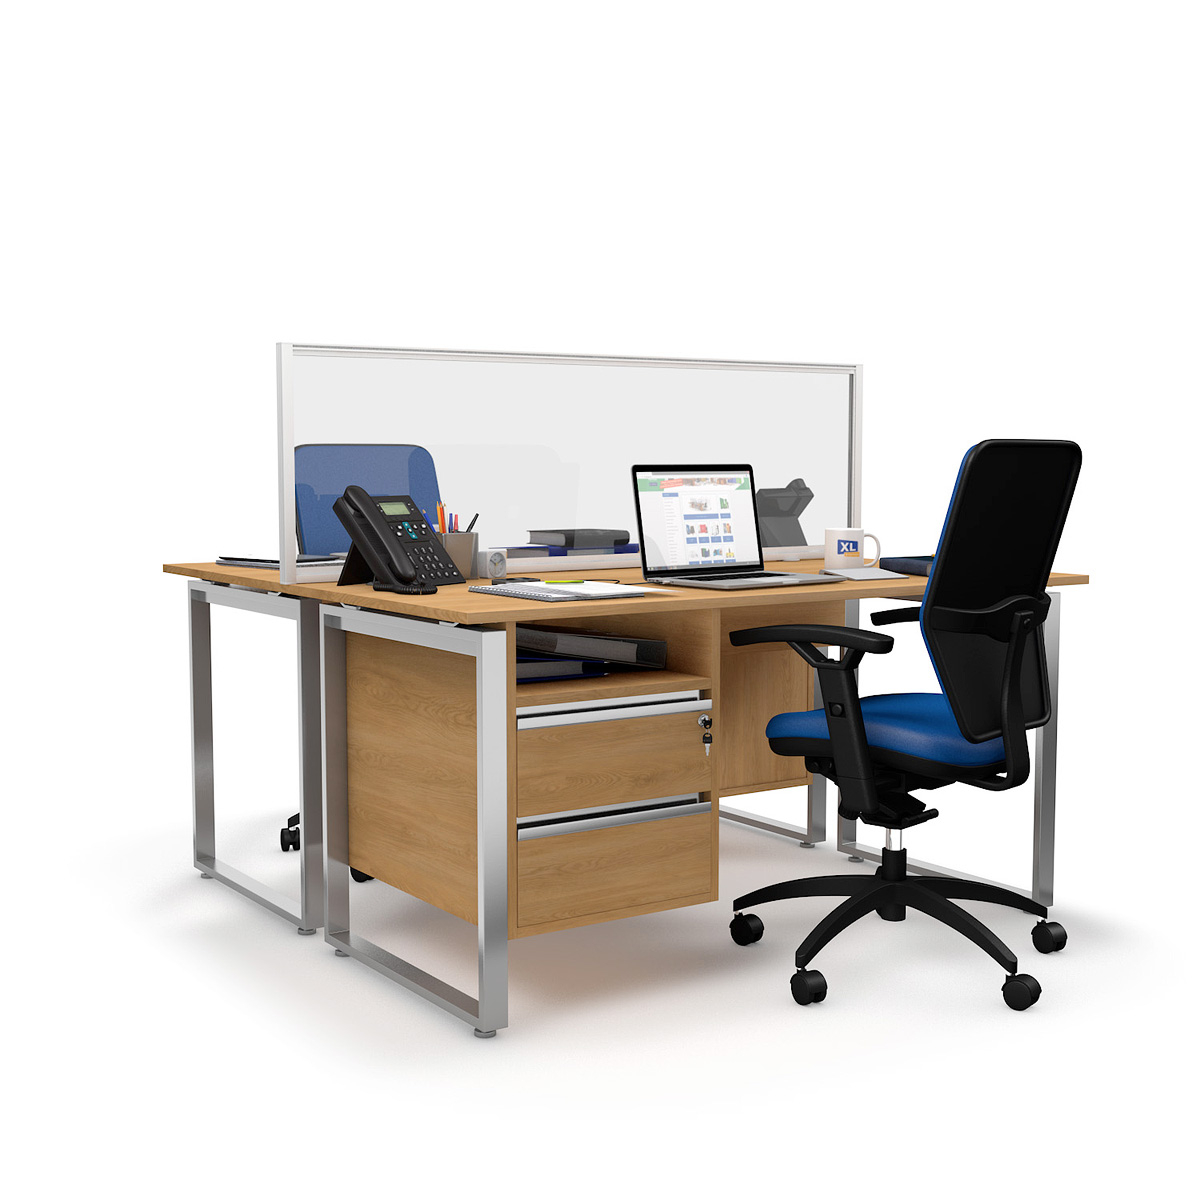 FRONTIER® Glazed Office Screen Desk Dividers With White Frame 